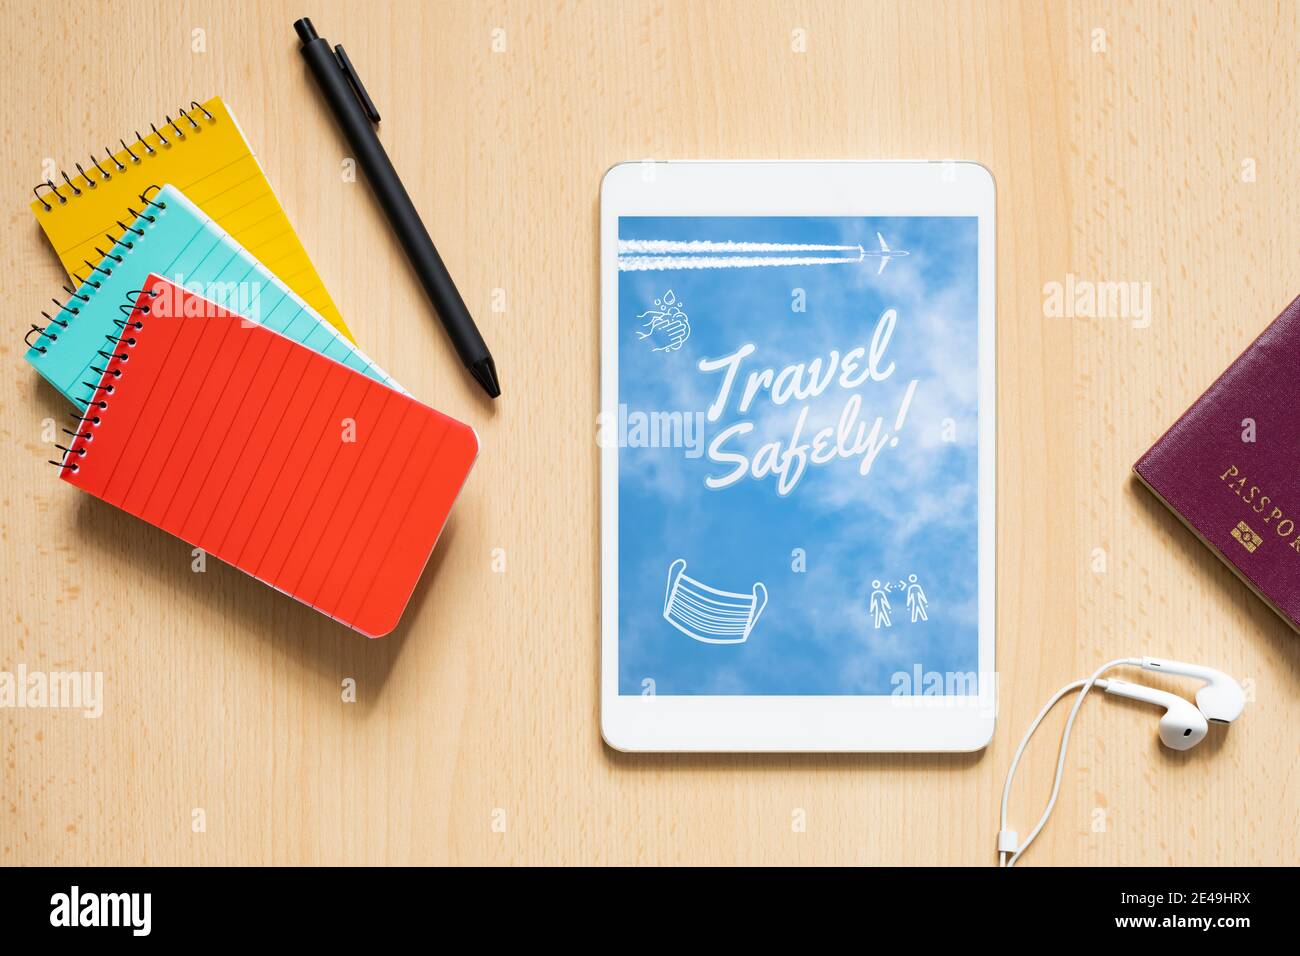 Flat lay with copy space, view from above of three colorful notepads, pen, passport and a tablet with a digital illustration. Stock Photo